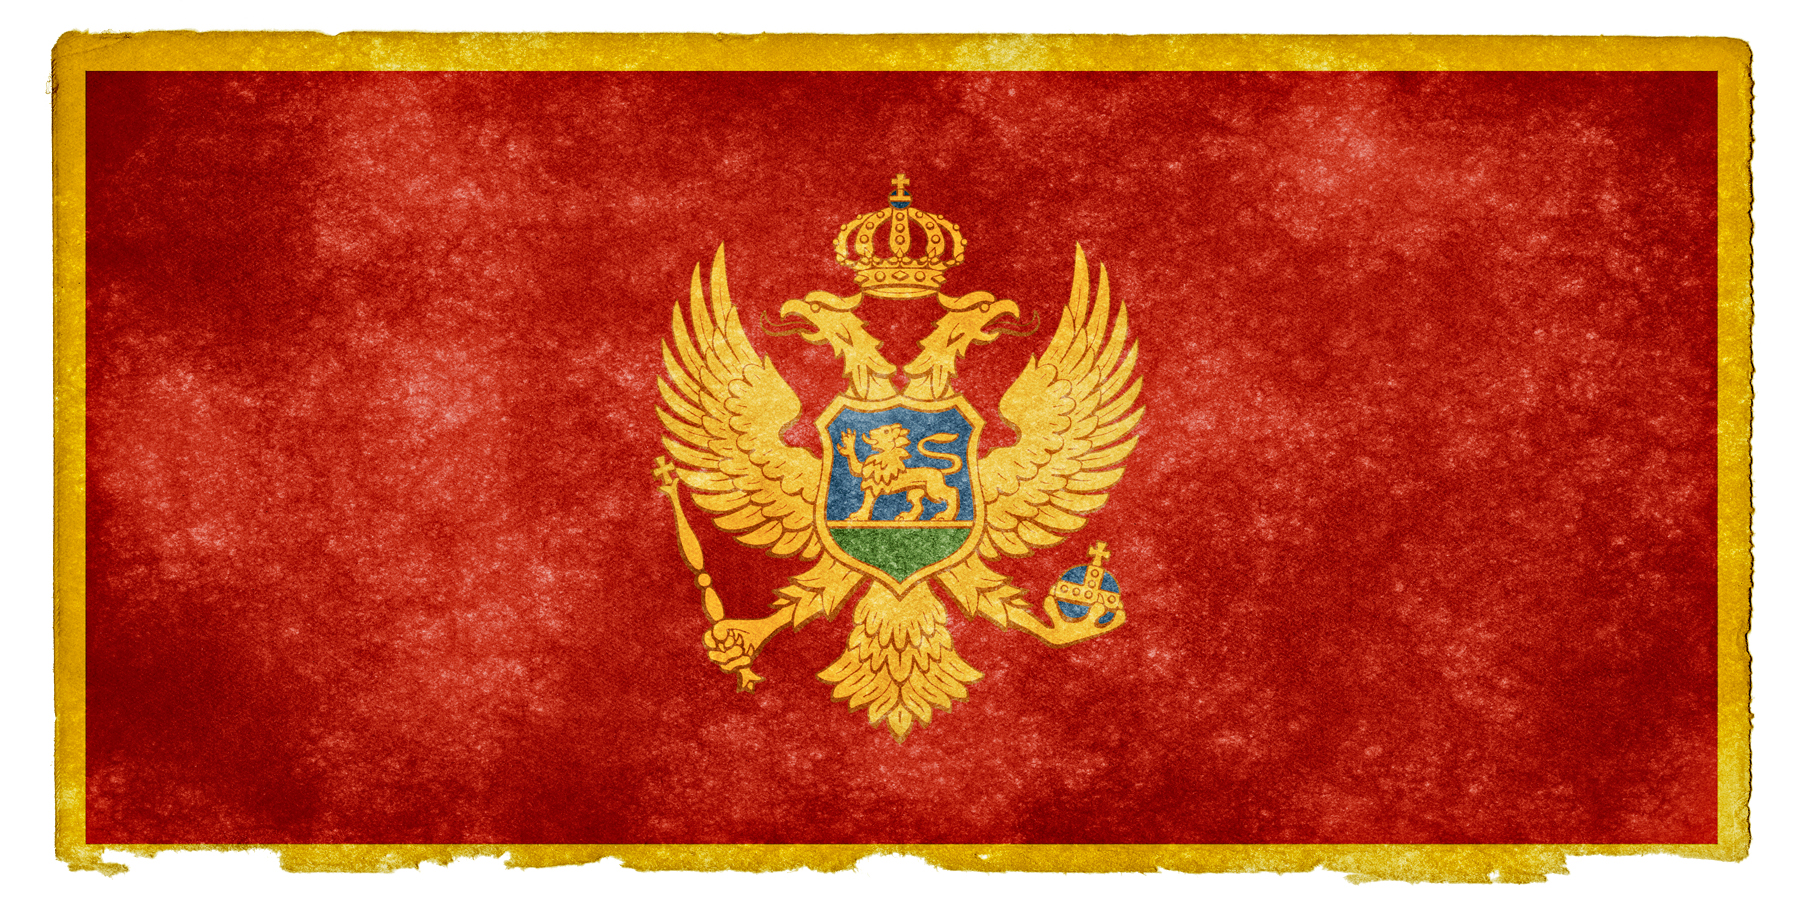 the flag of the russian empire in yellow and red with an eagle, and a crown